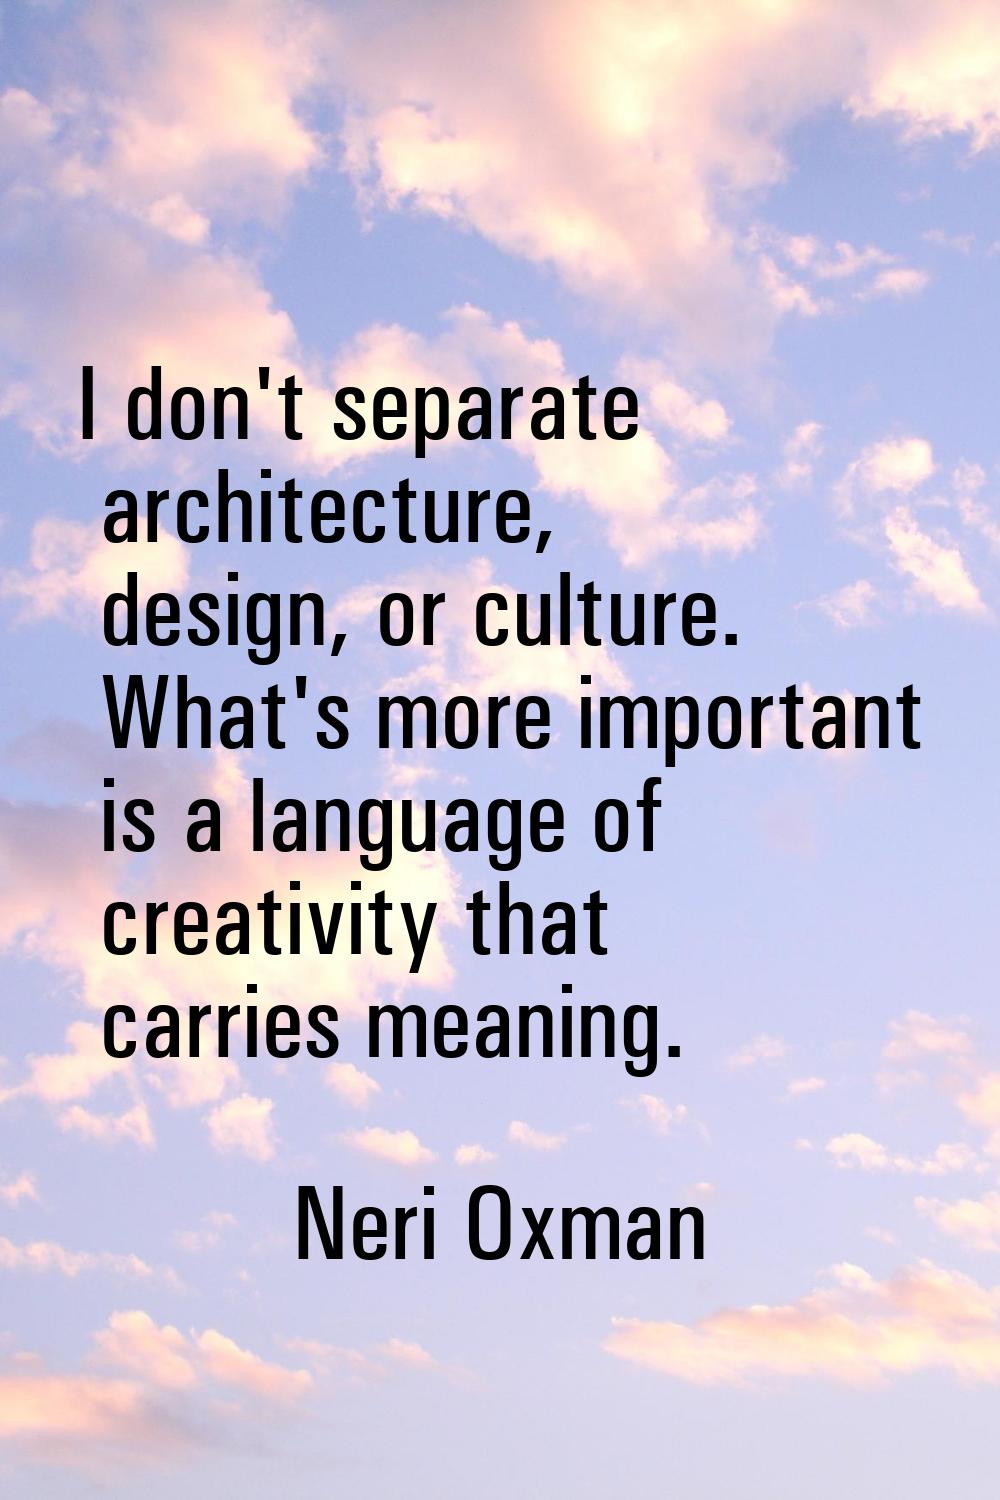 I don't separate architecture, design, or culture. What's more important is a language of creativit